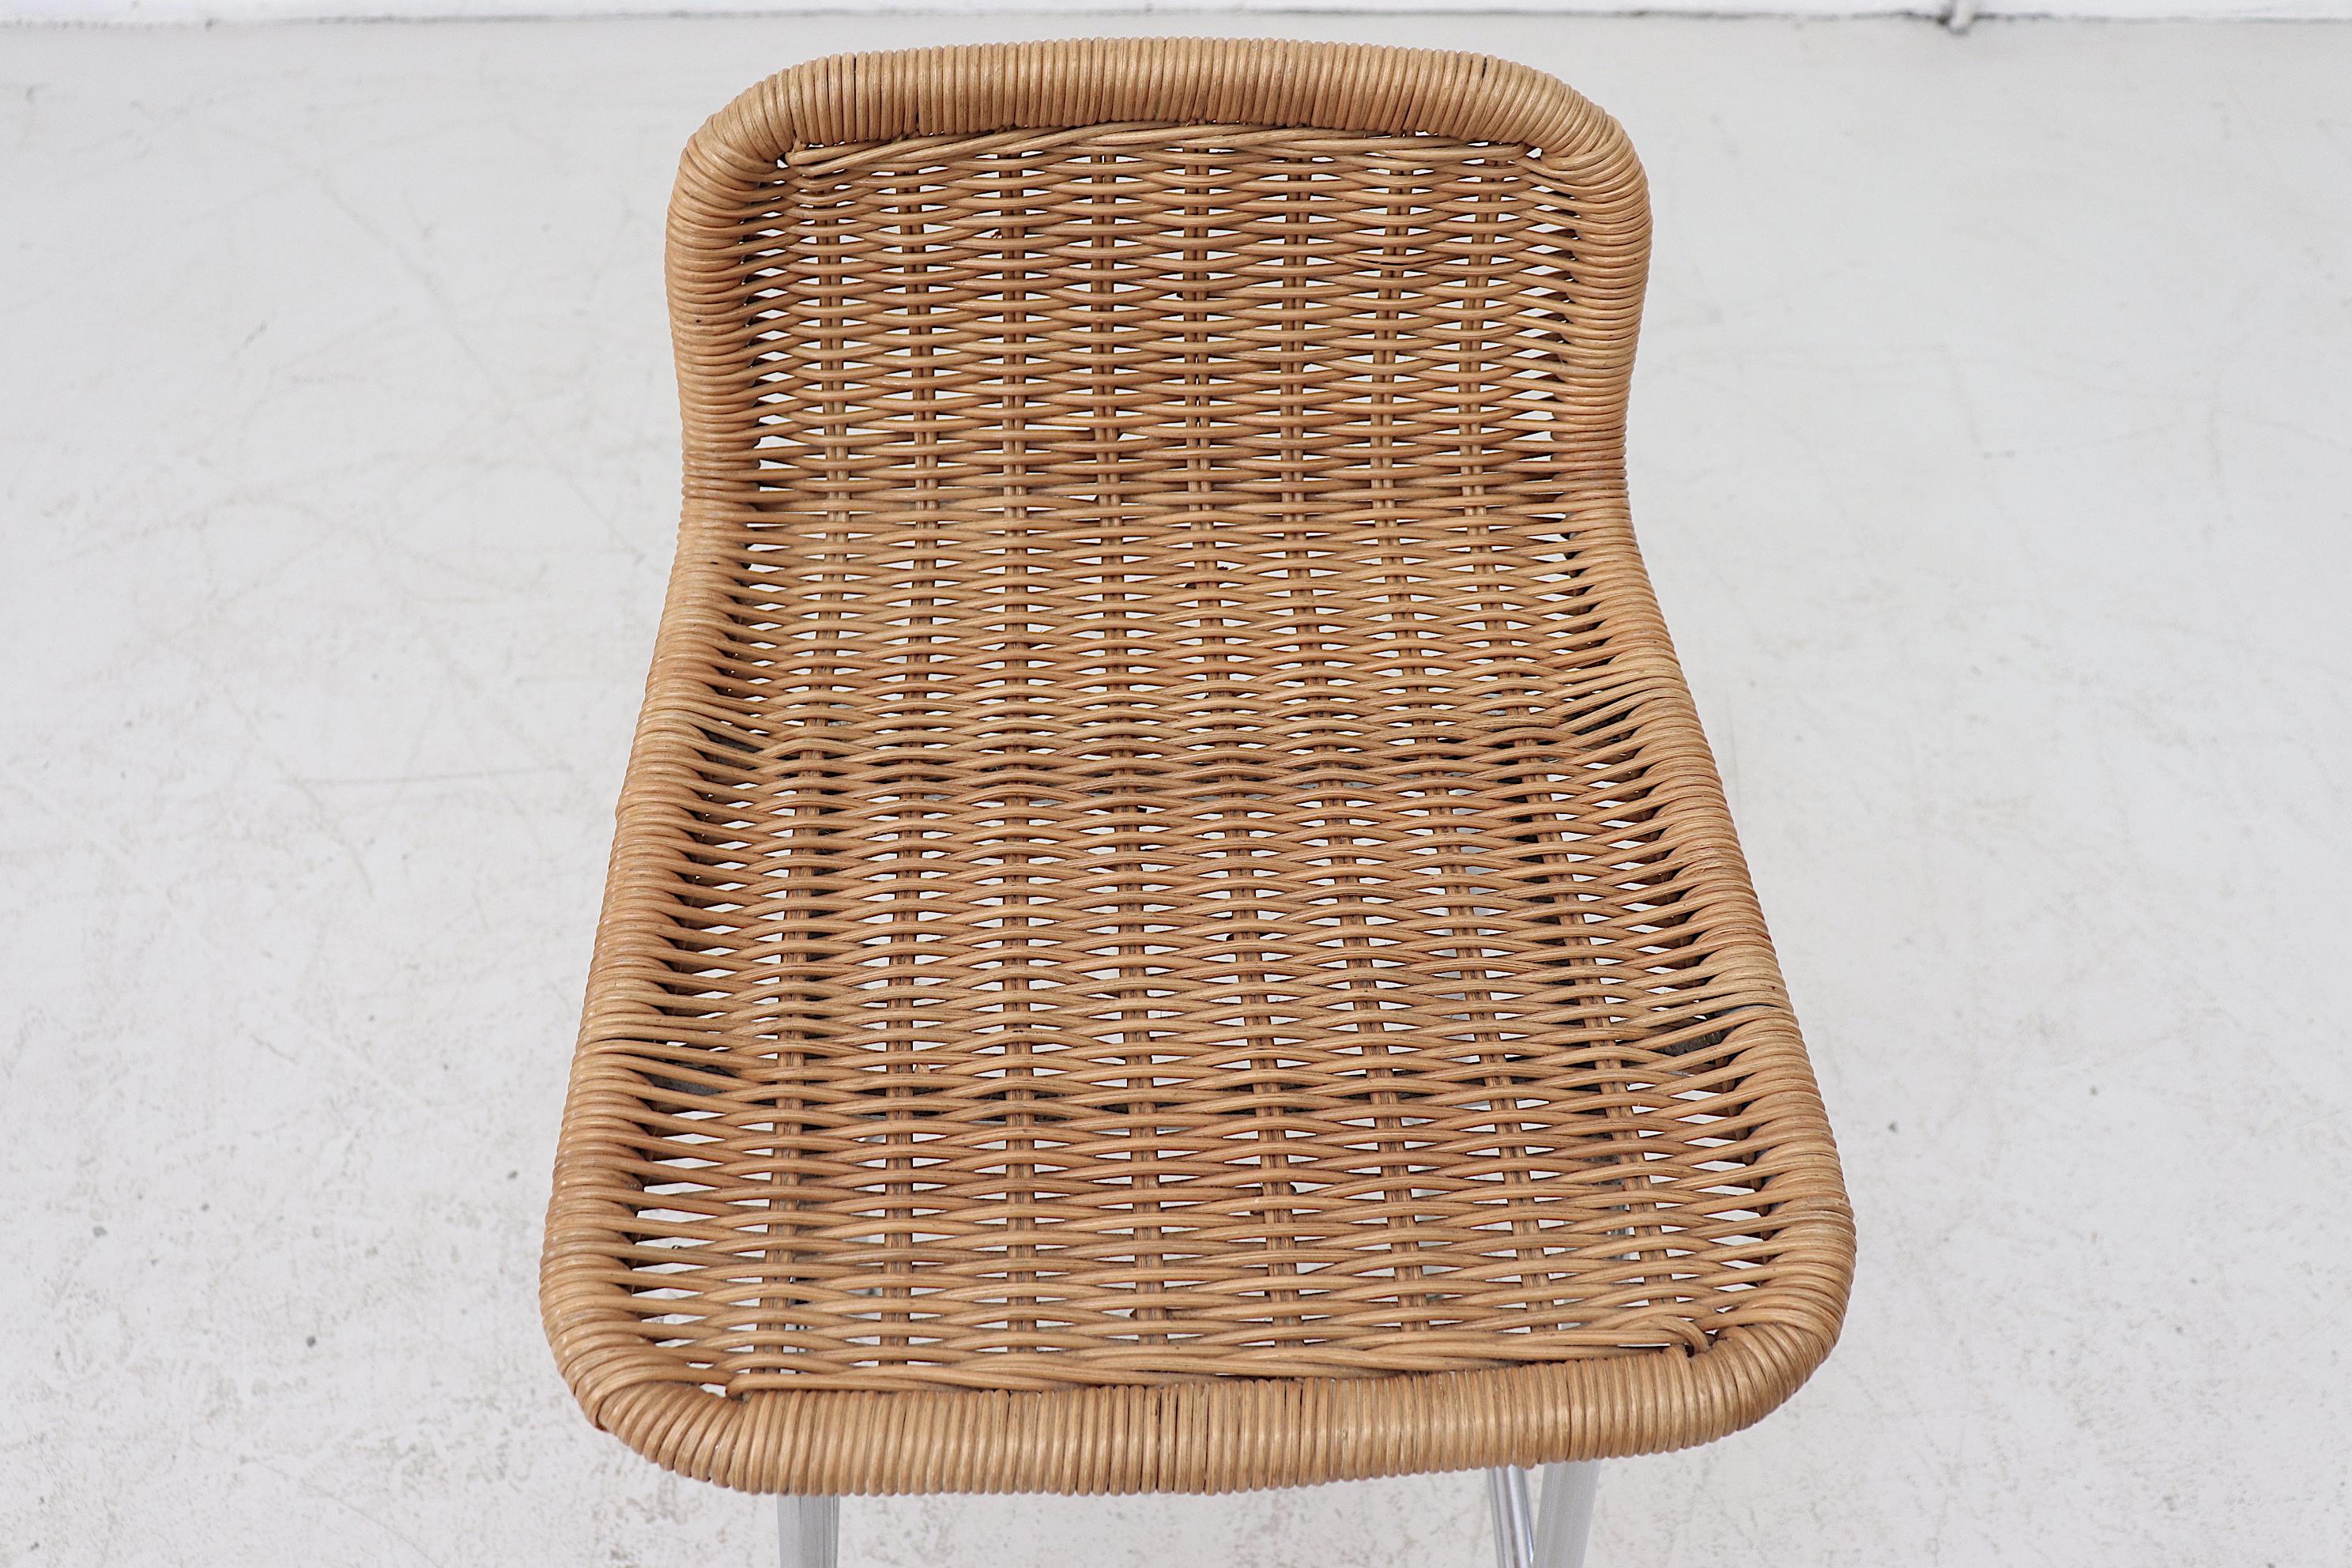 Rattan Set of 4 Charlotte Perriand Style Wicker Bar Stools